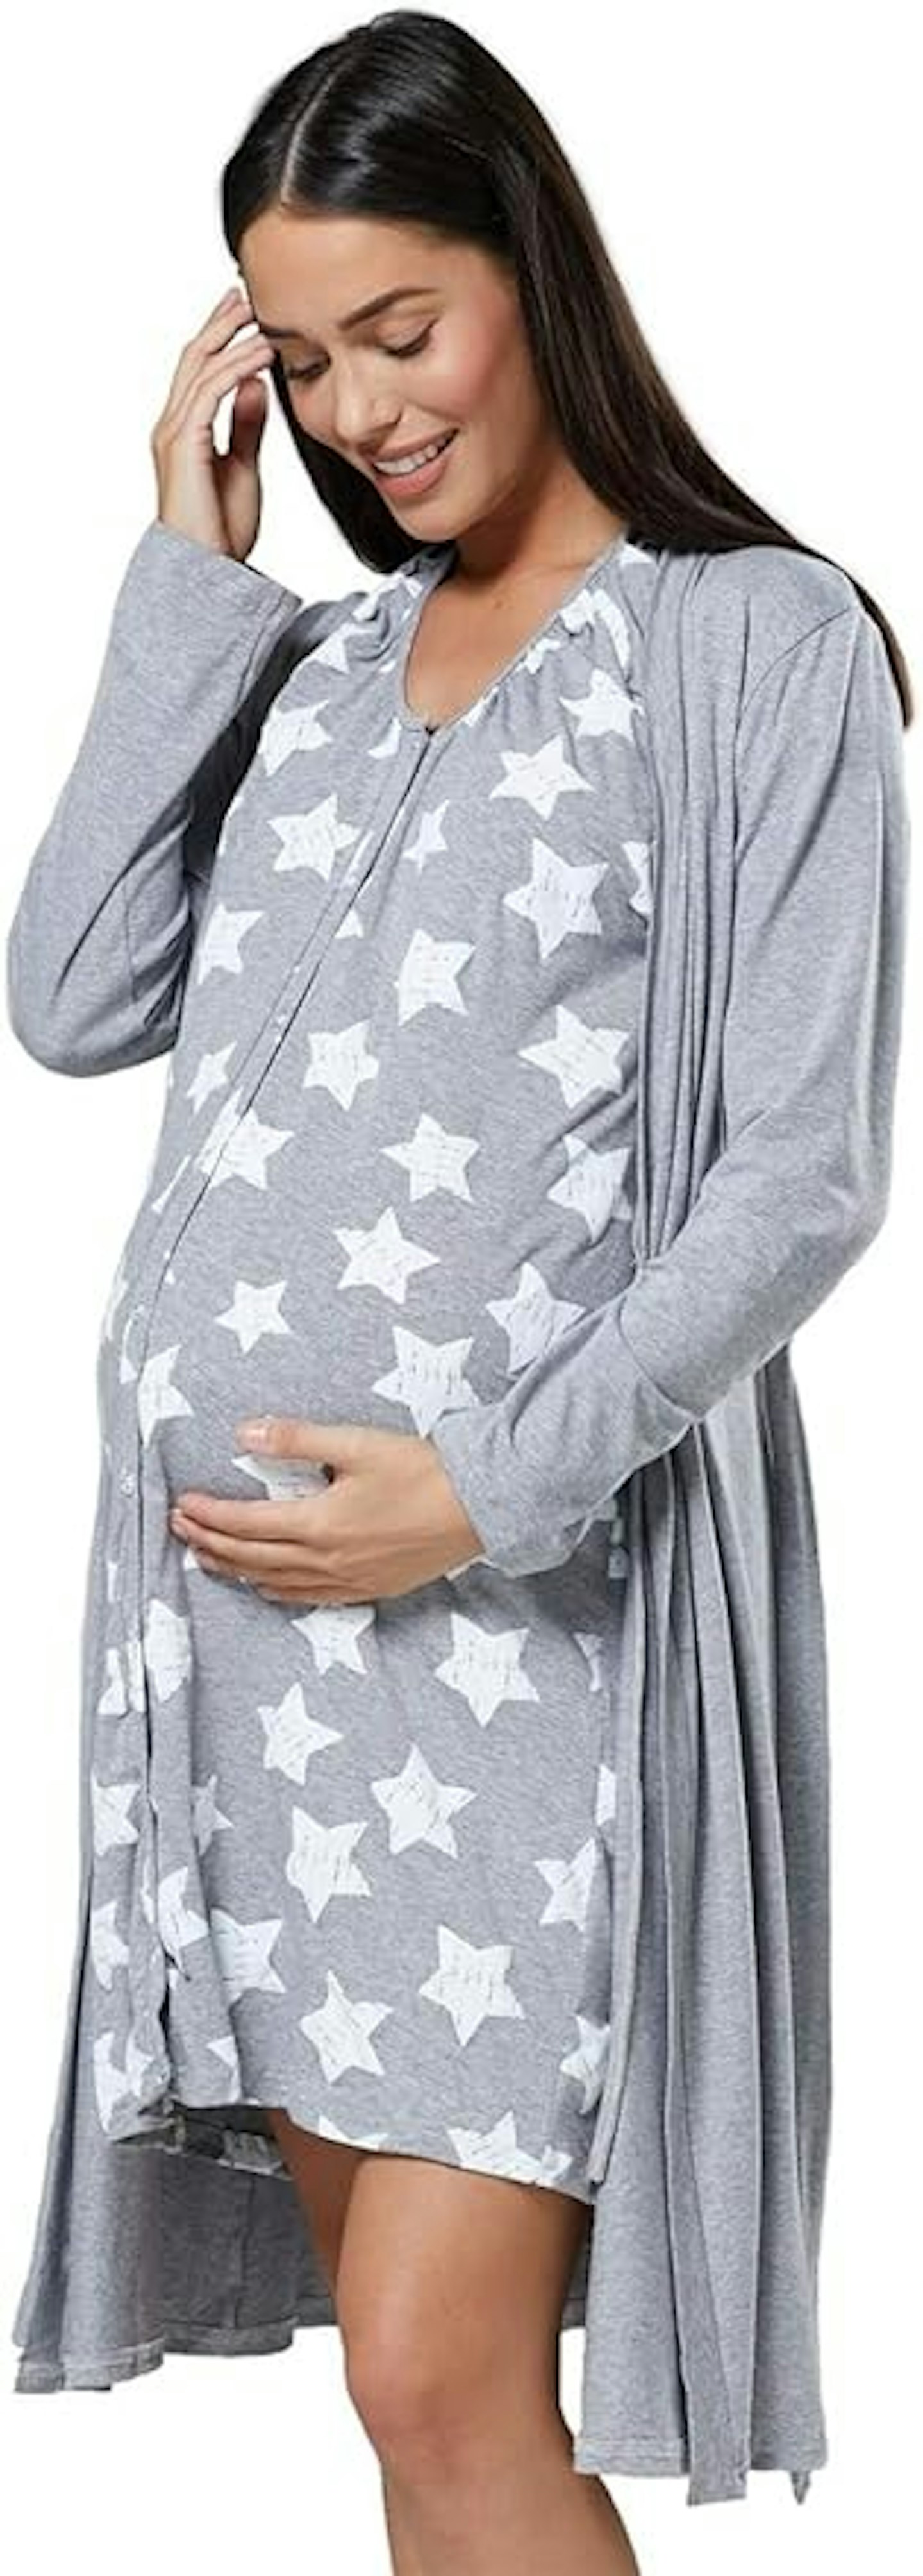 birthing gown